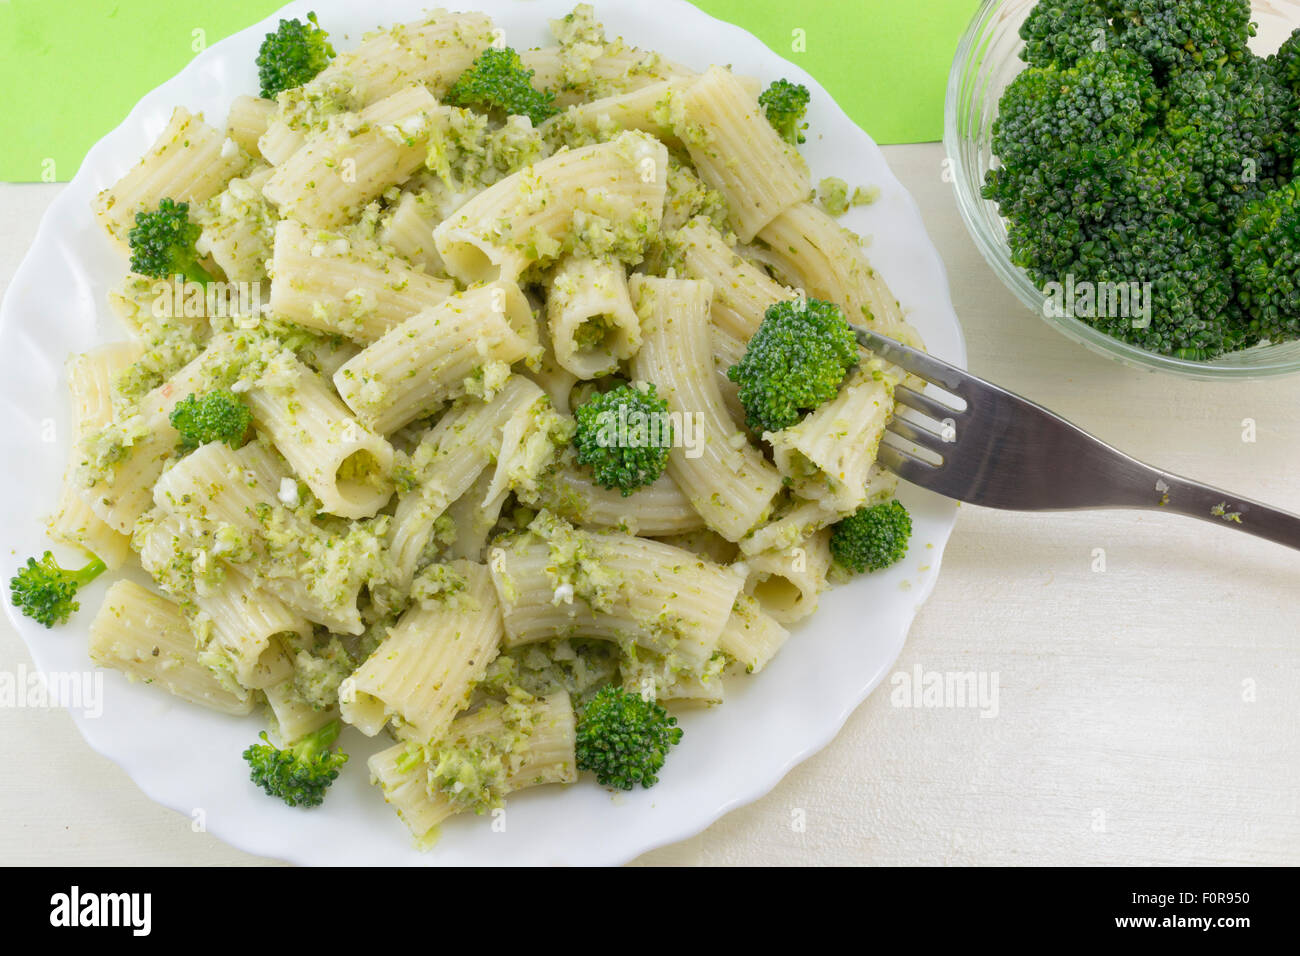 Pasta with broccoli served with cooked broccoli in a white bow on a wooden table. Ready fo eating Stock Photo